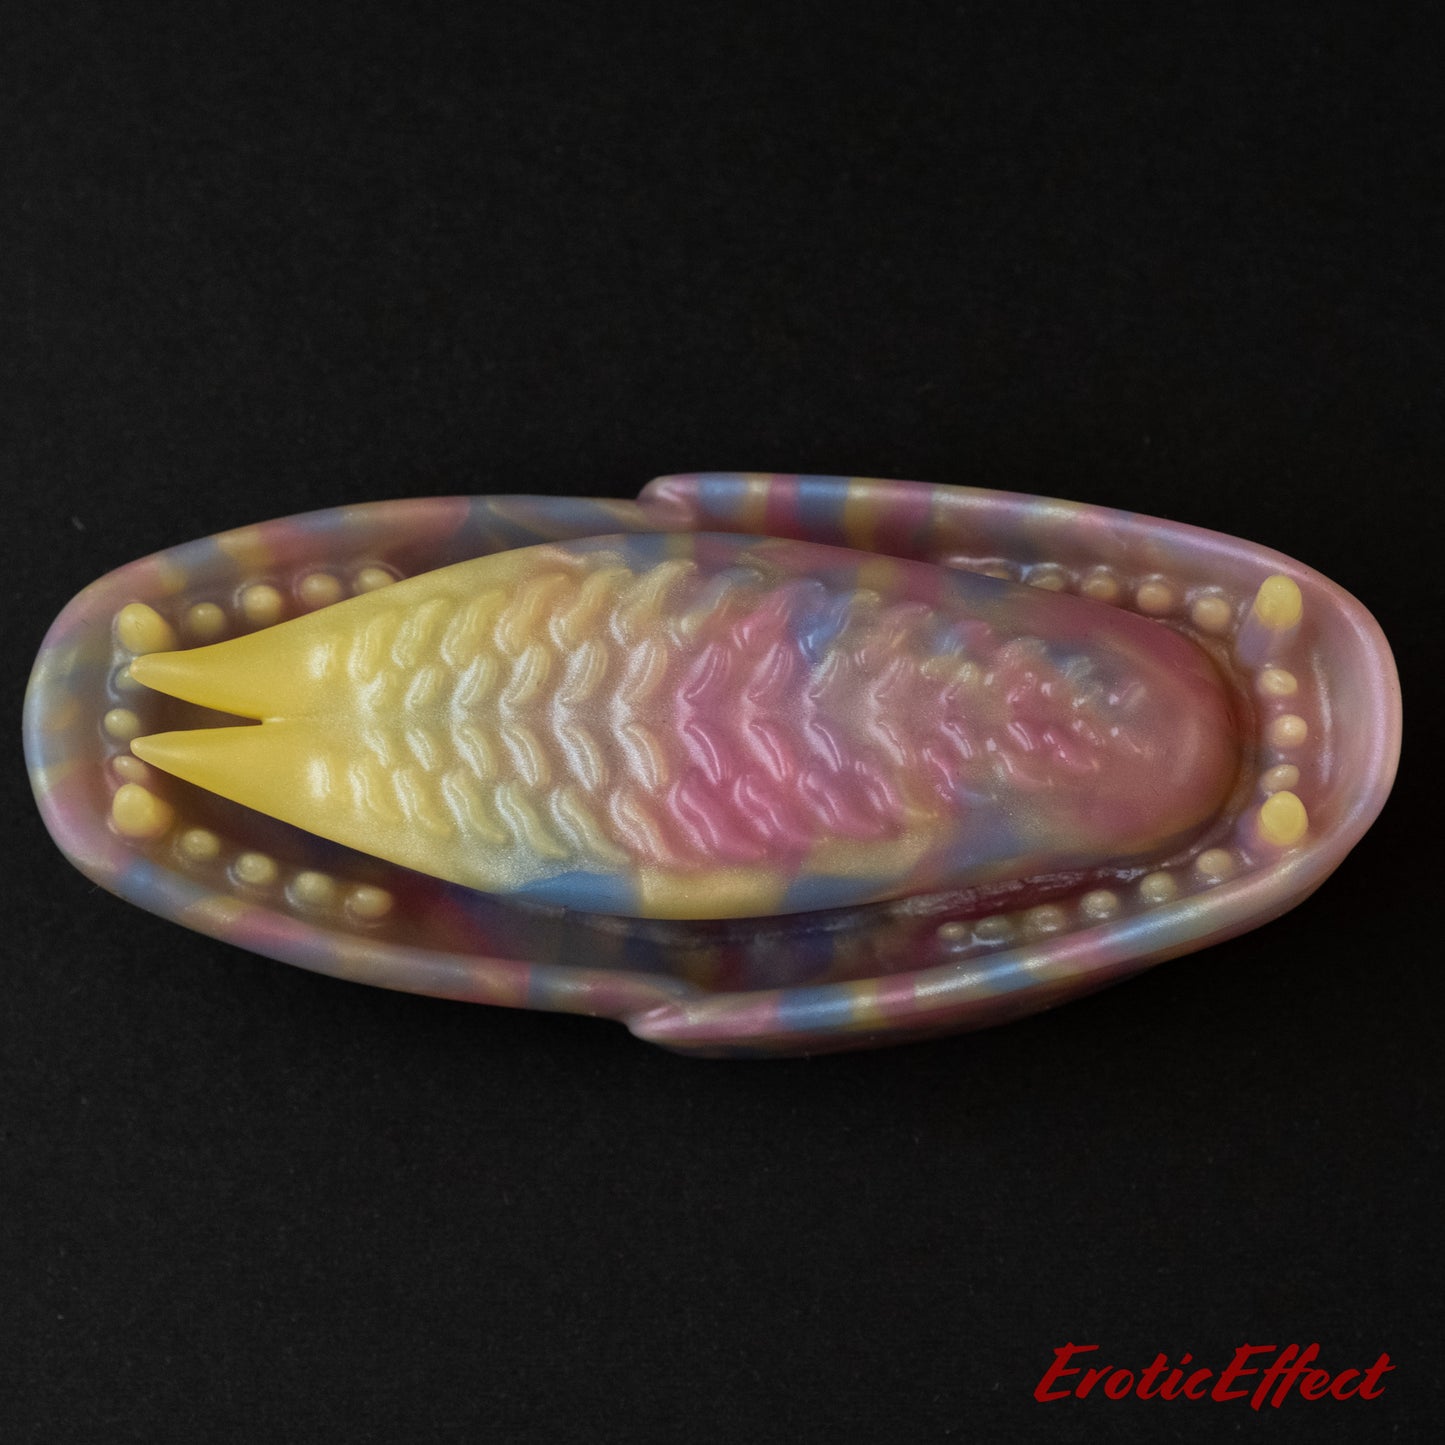 Ecthir Silicone Grindable - Medium Firmness - Pink/Yellow/Blue Shimmer